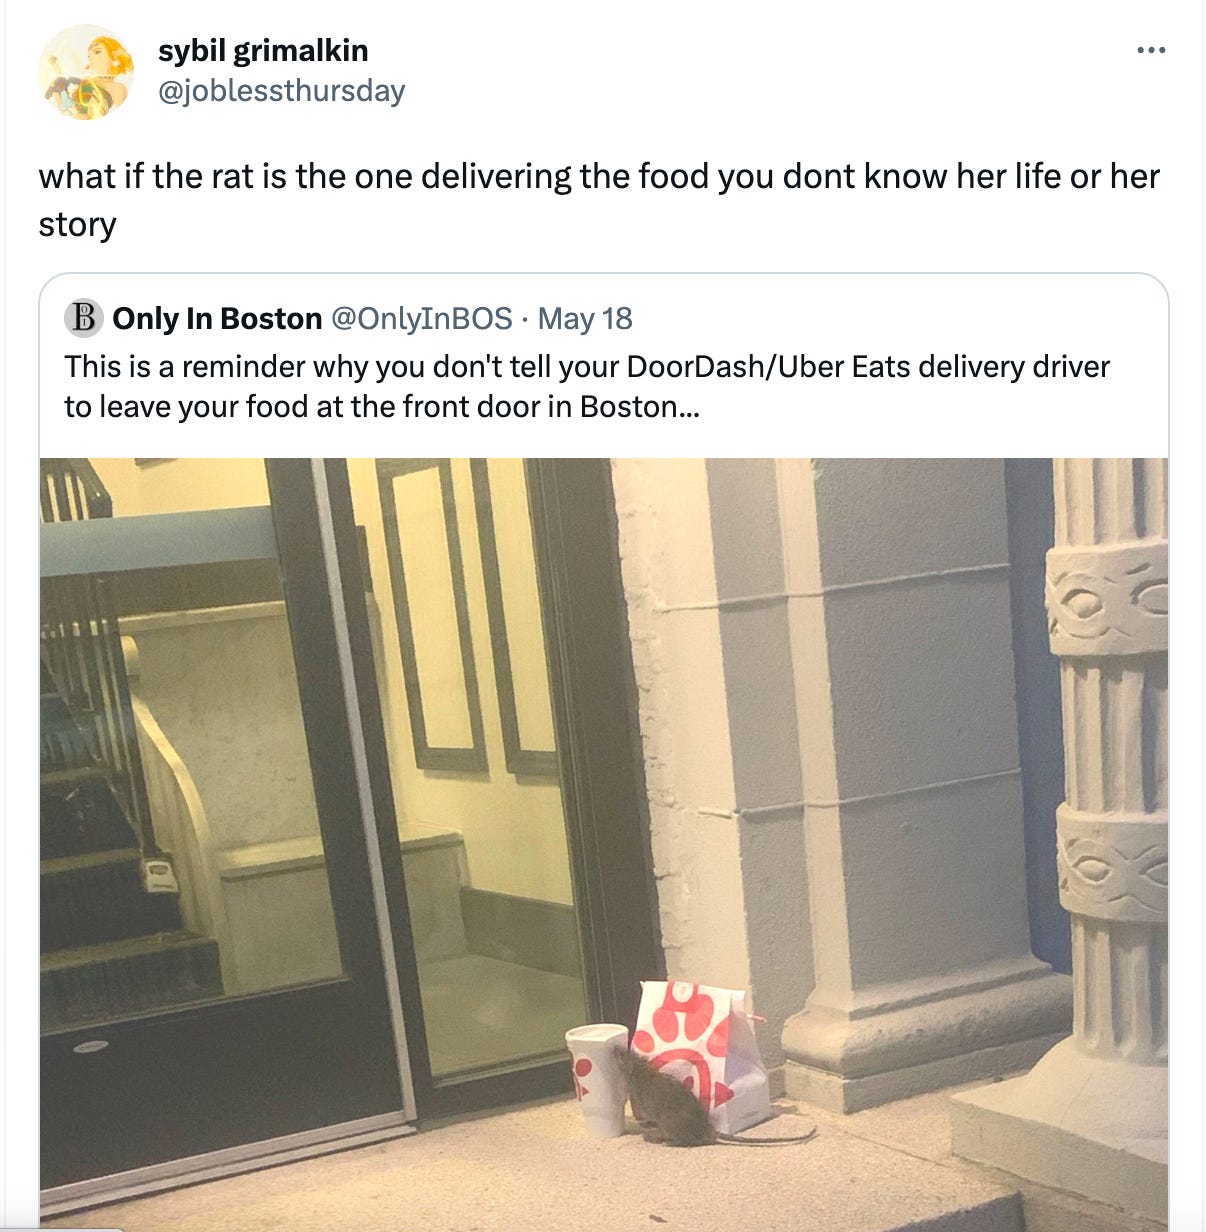 A tweet from Only In Boston (@OnlyInBOS) with an image of a rat chilling next to someone's ChikFilA outside their building that reads "This is a reminder why you don't tell your DoorDash/Uber Eats delivery driver to leave your food at the front door in Boston..." that's been QT'ed by sybil grimalkin (@joblessthursday) that reads "what if the rat is the one delivering the food you dont know her life or her story"